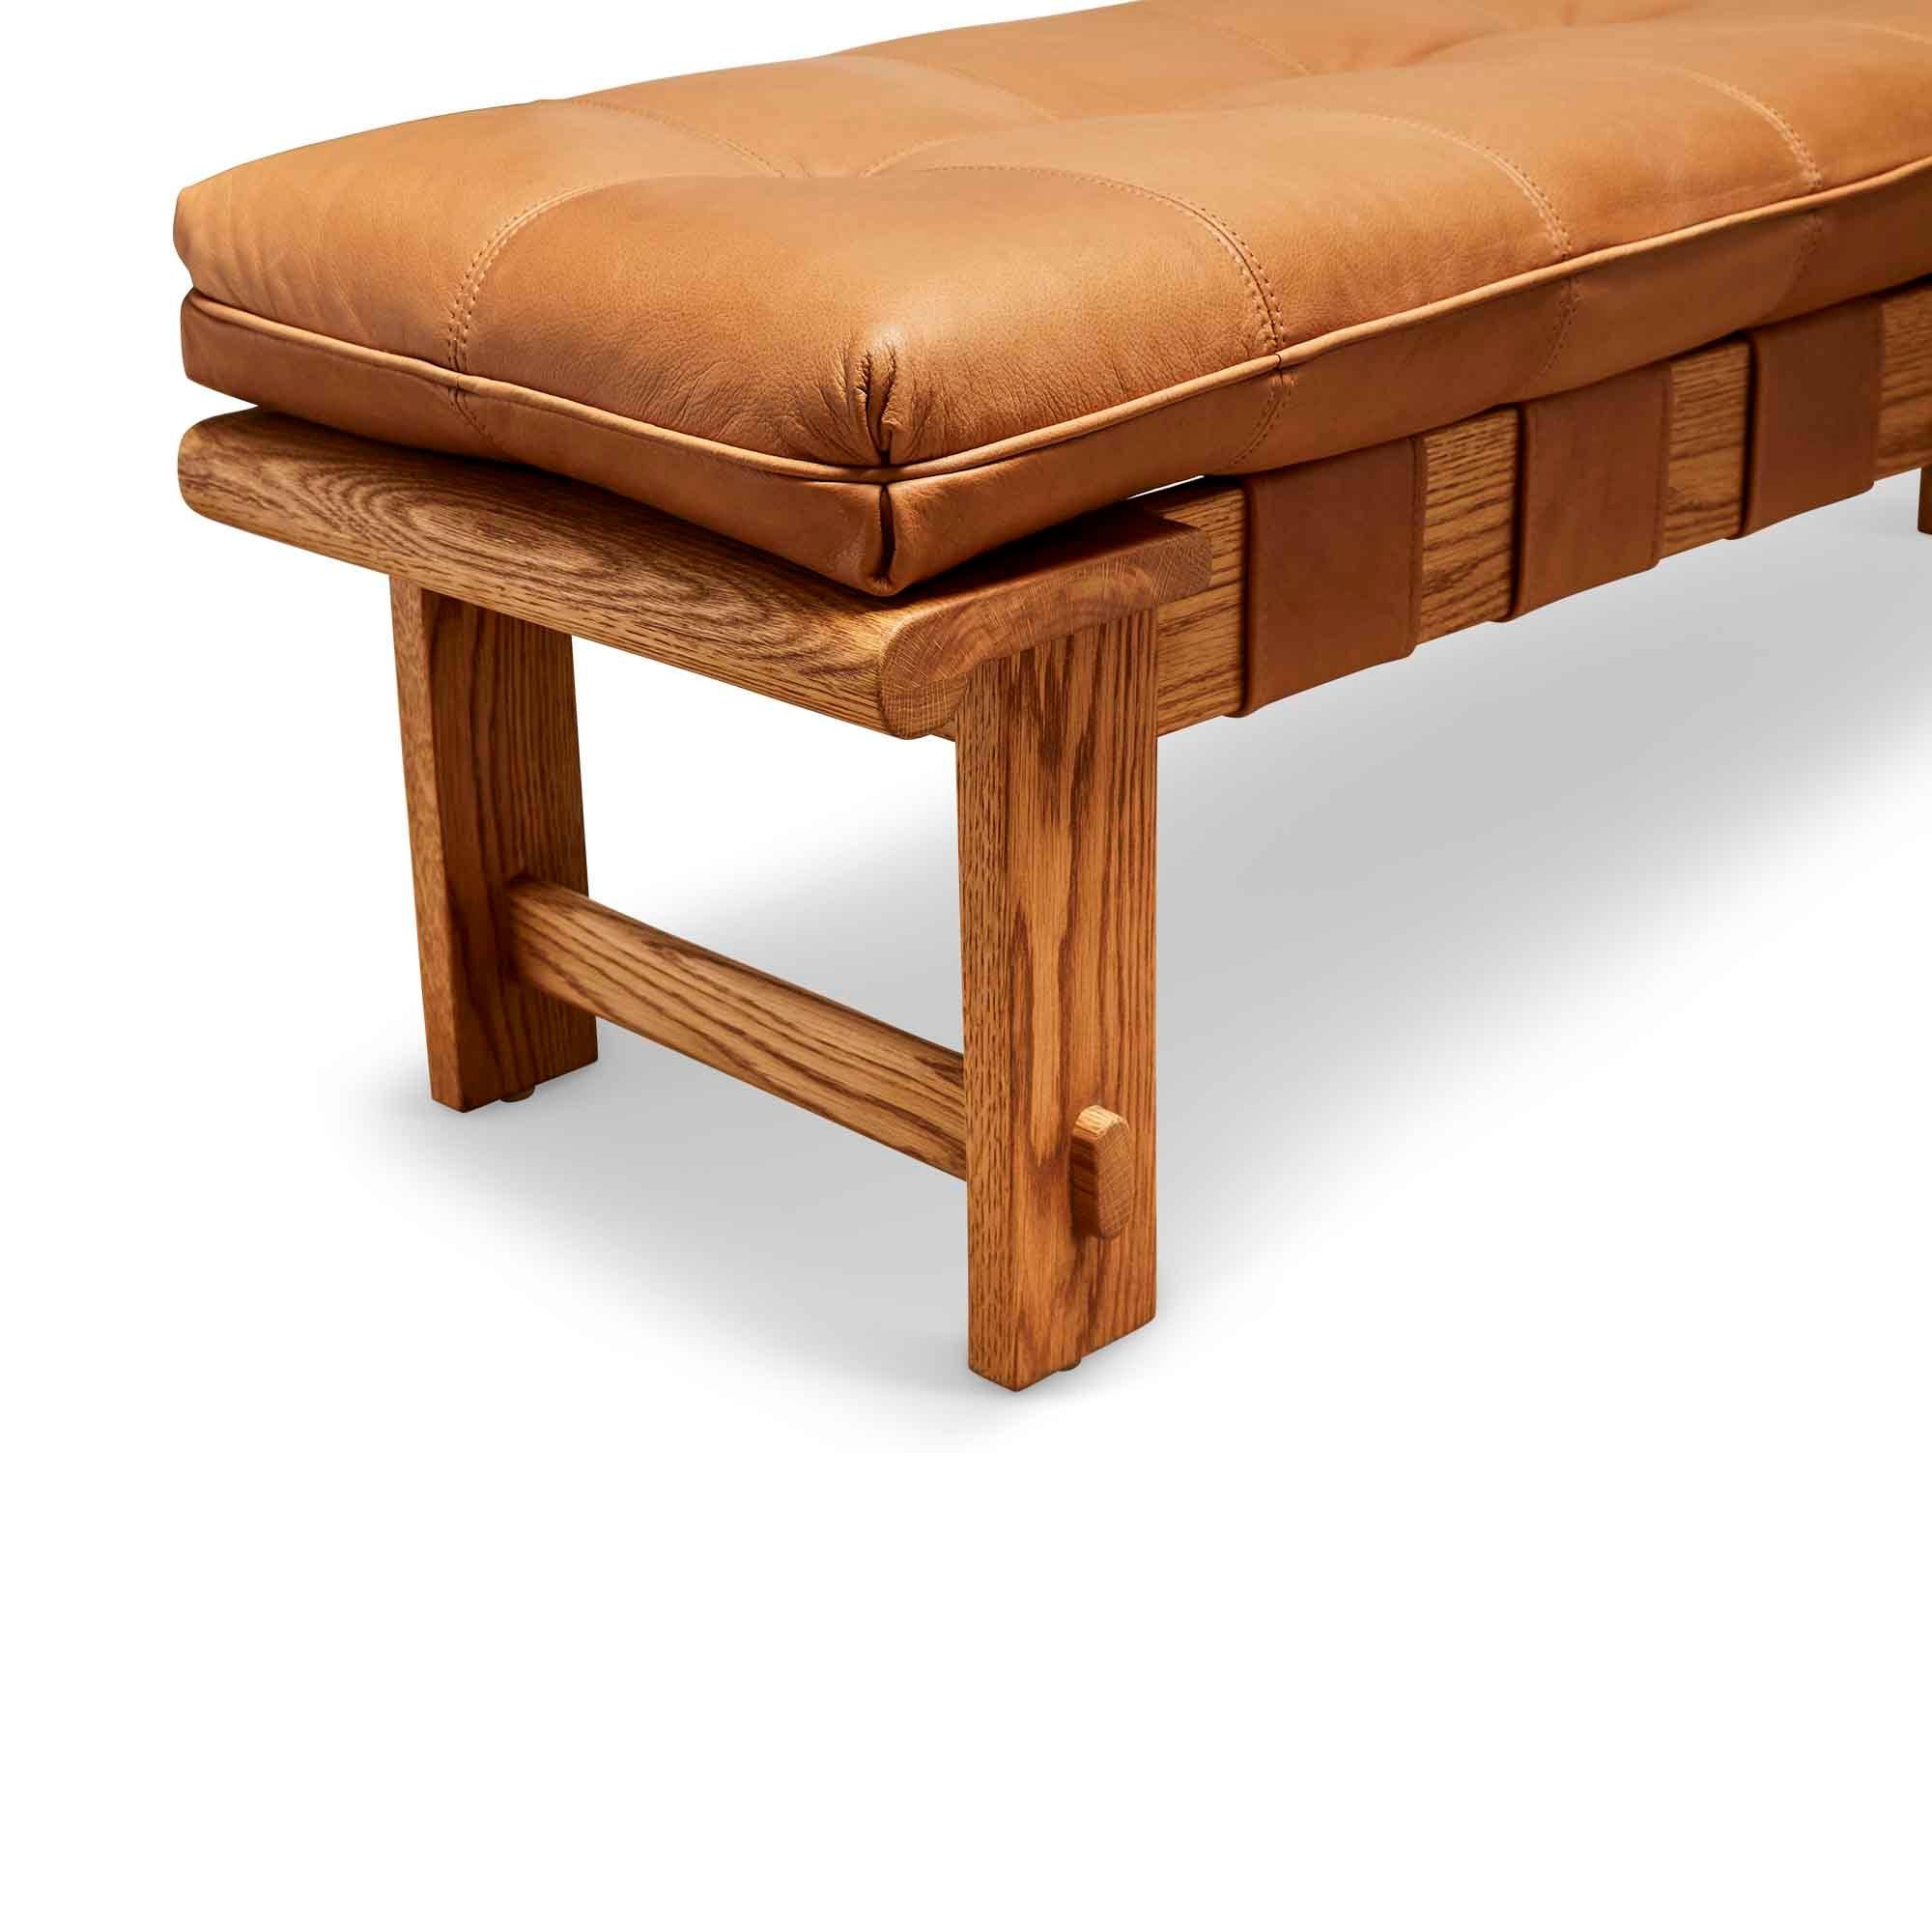 Mid-Century Modern Oak and Tan Leather Ojai Bench by Lawson-Fenning For Sale